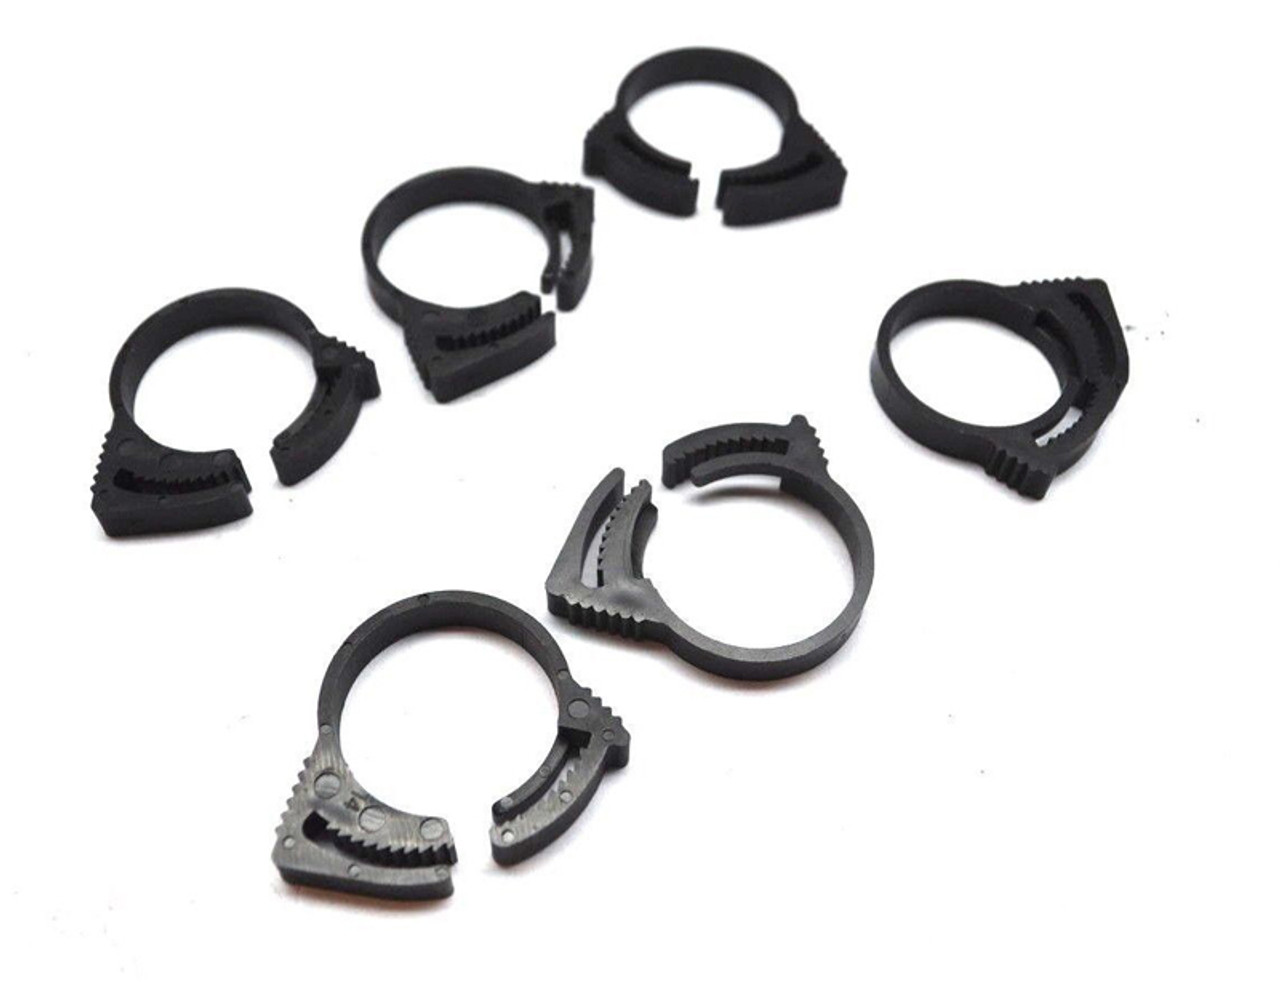 Plastic Hose Clamps 6 Pack